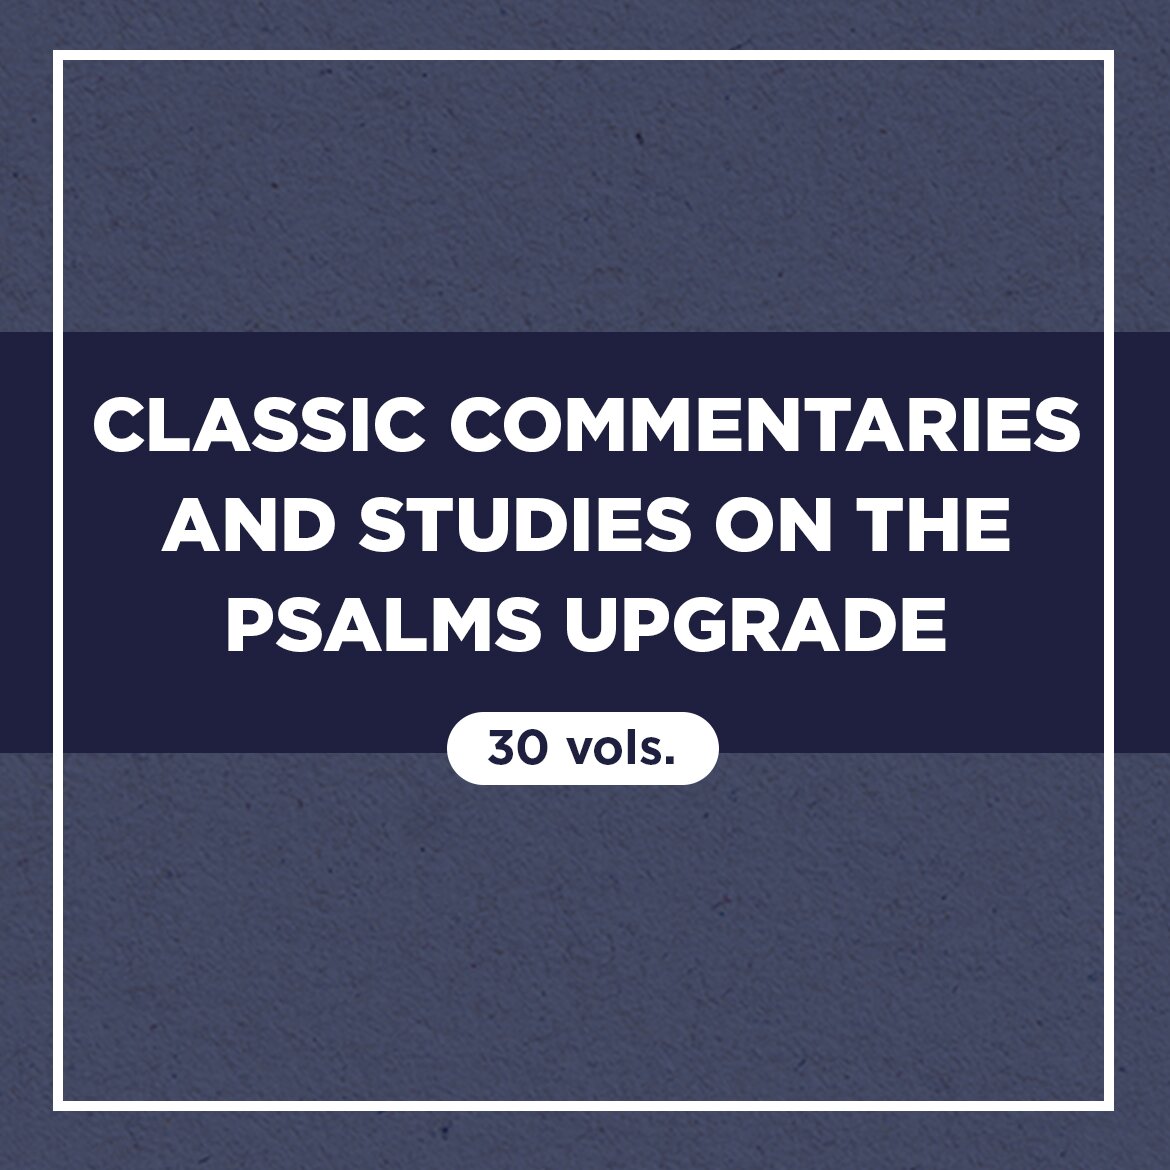 Classic Commentaries and Studies on the Psalms Upgrade (30 vols.)